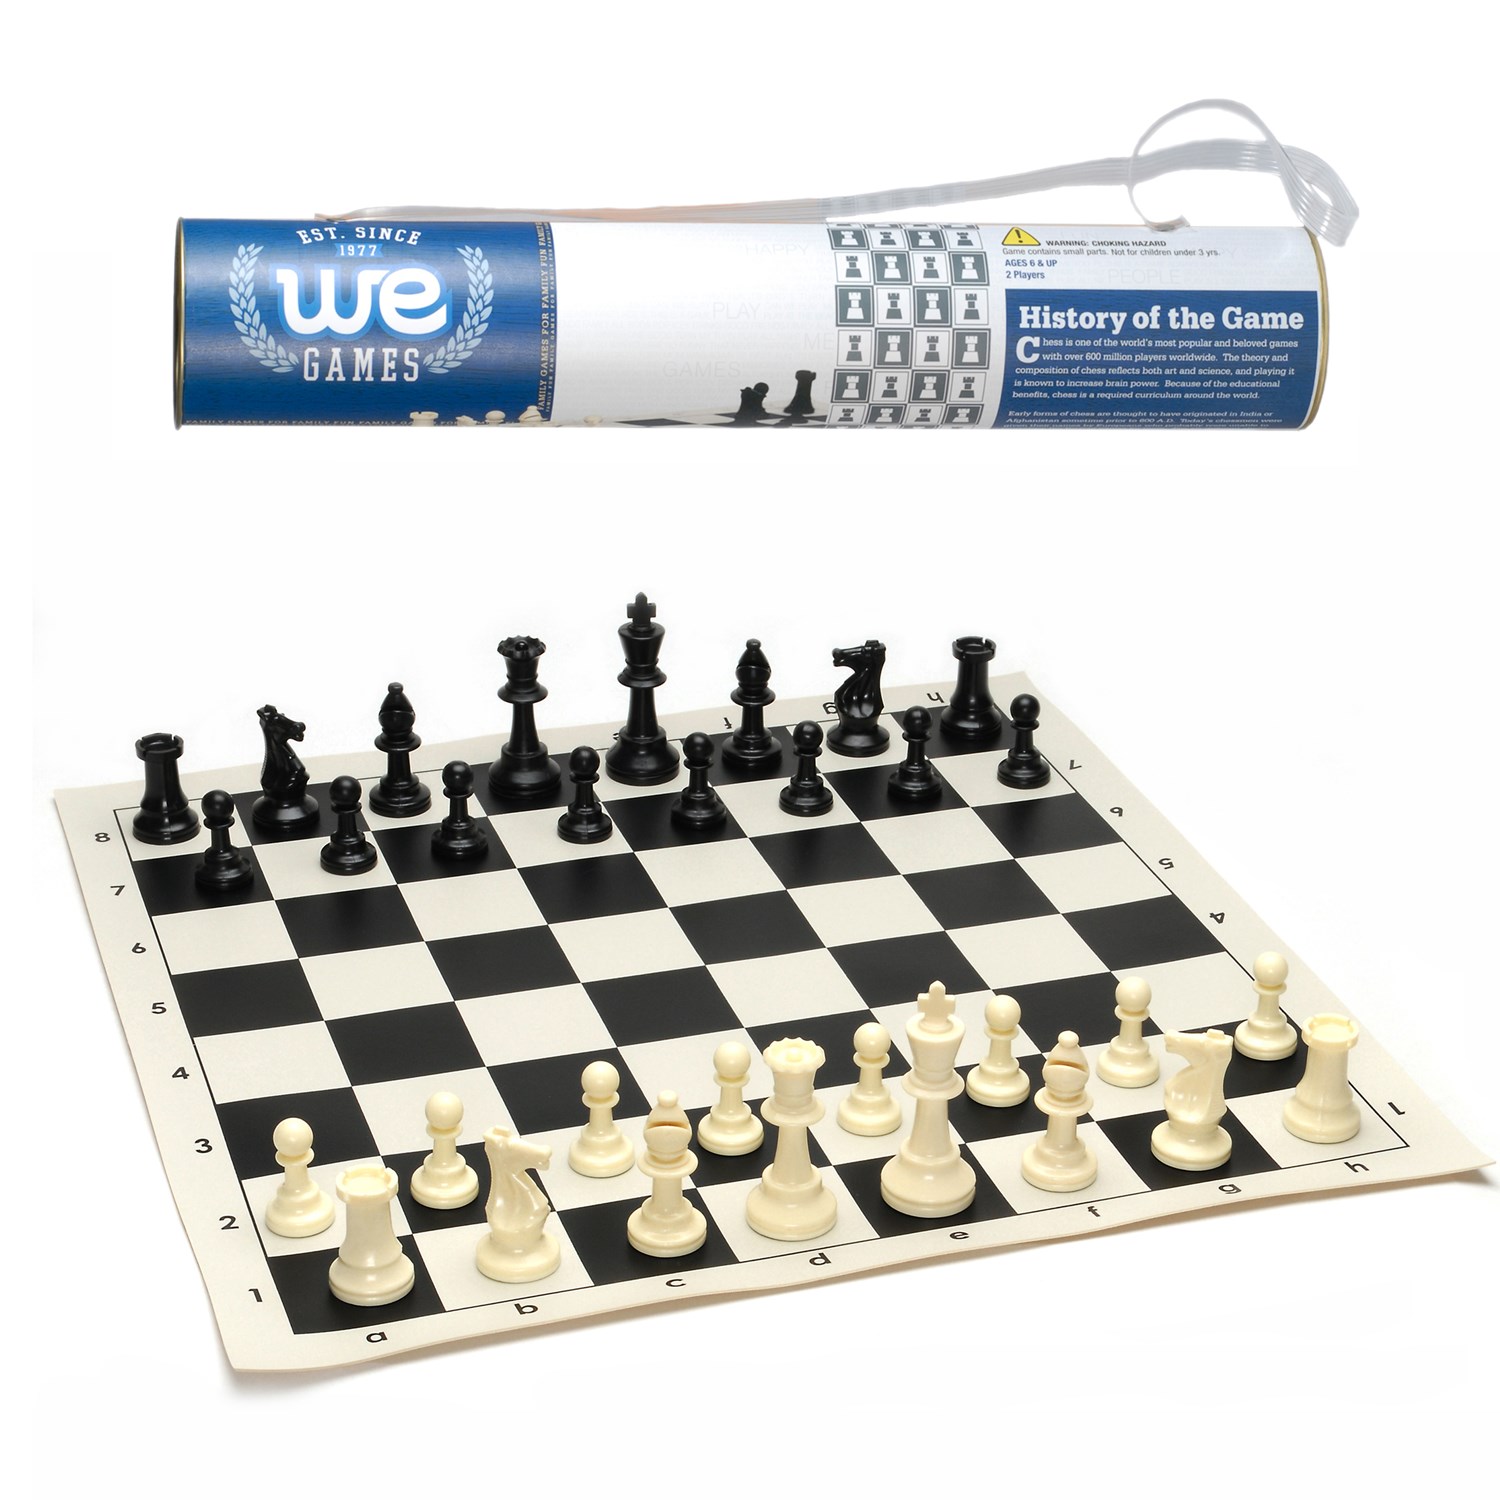 WE Games Roll-up Travel Chess Set in Carry Tube with Shoulder Strap - Wood Expressions